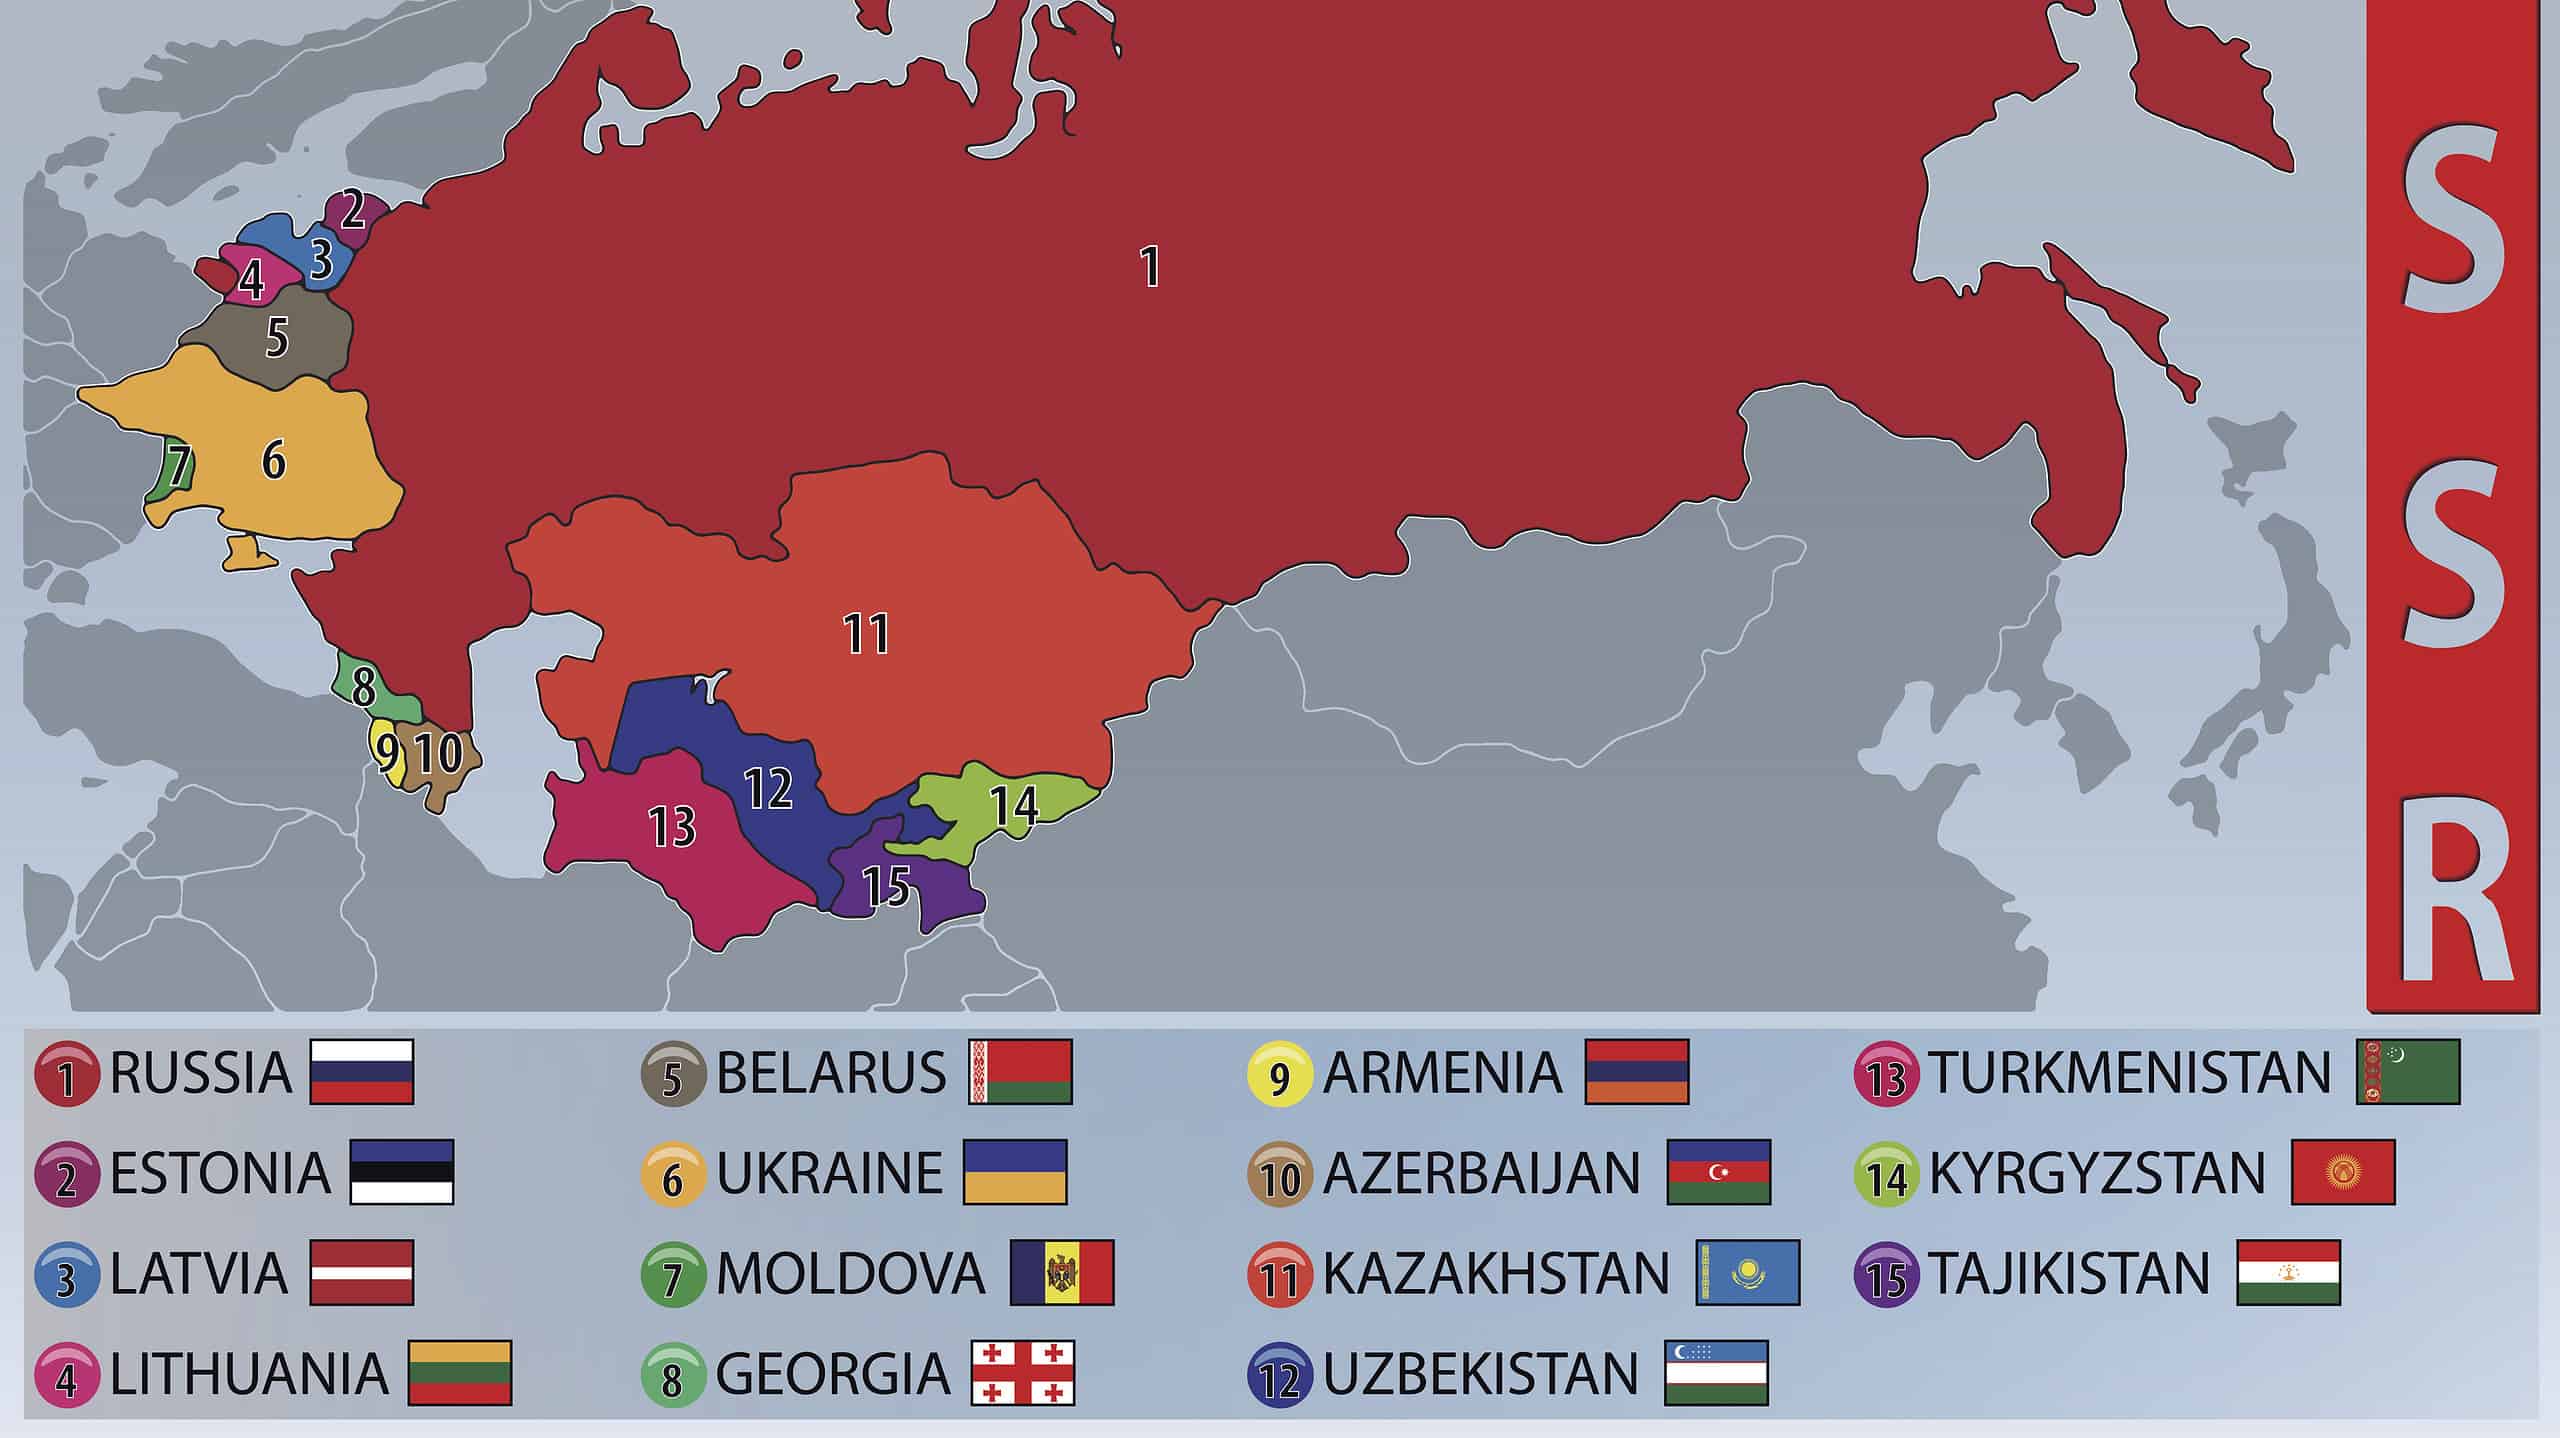 Illustration of the Map and Flags of the Republics of the Former USSR